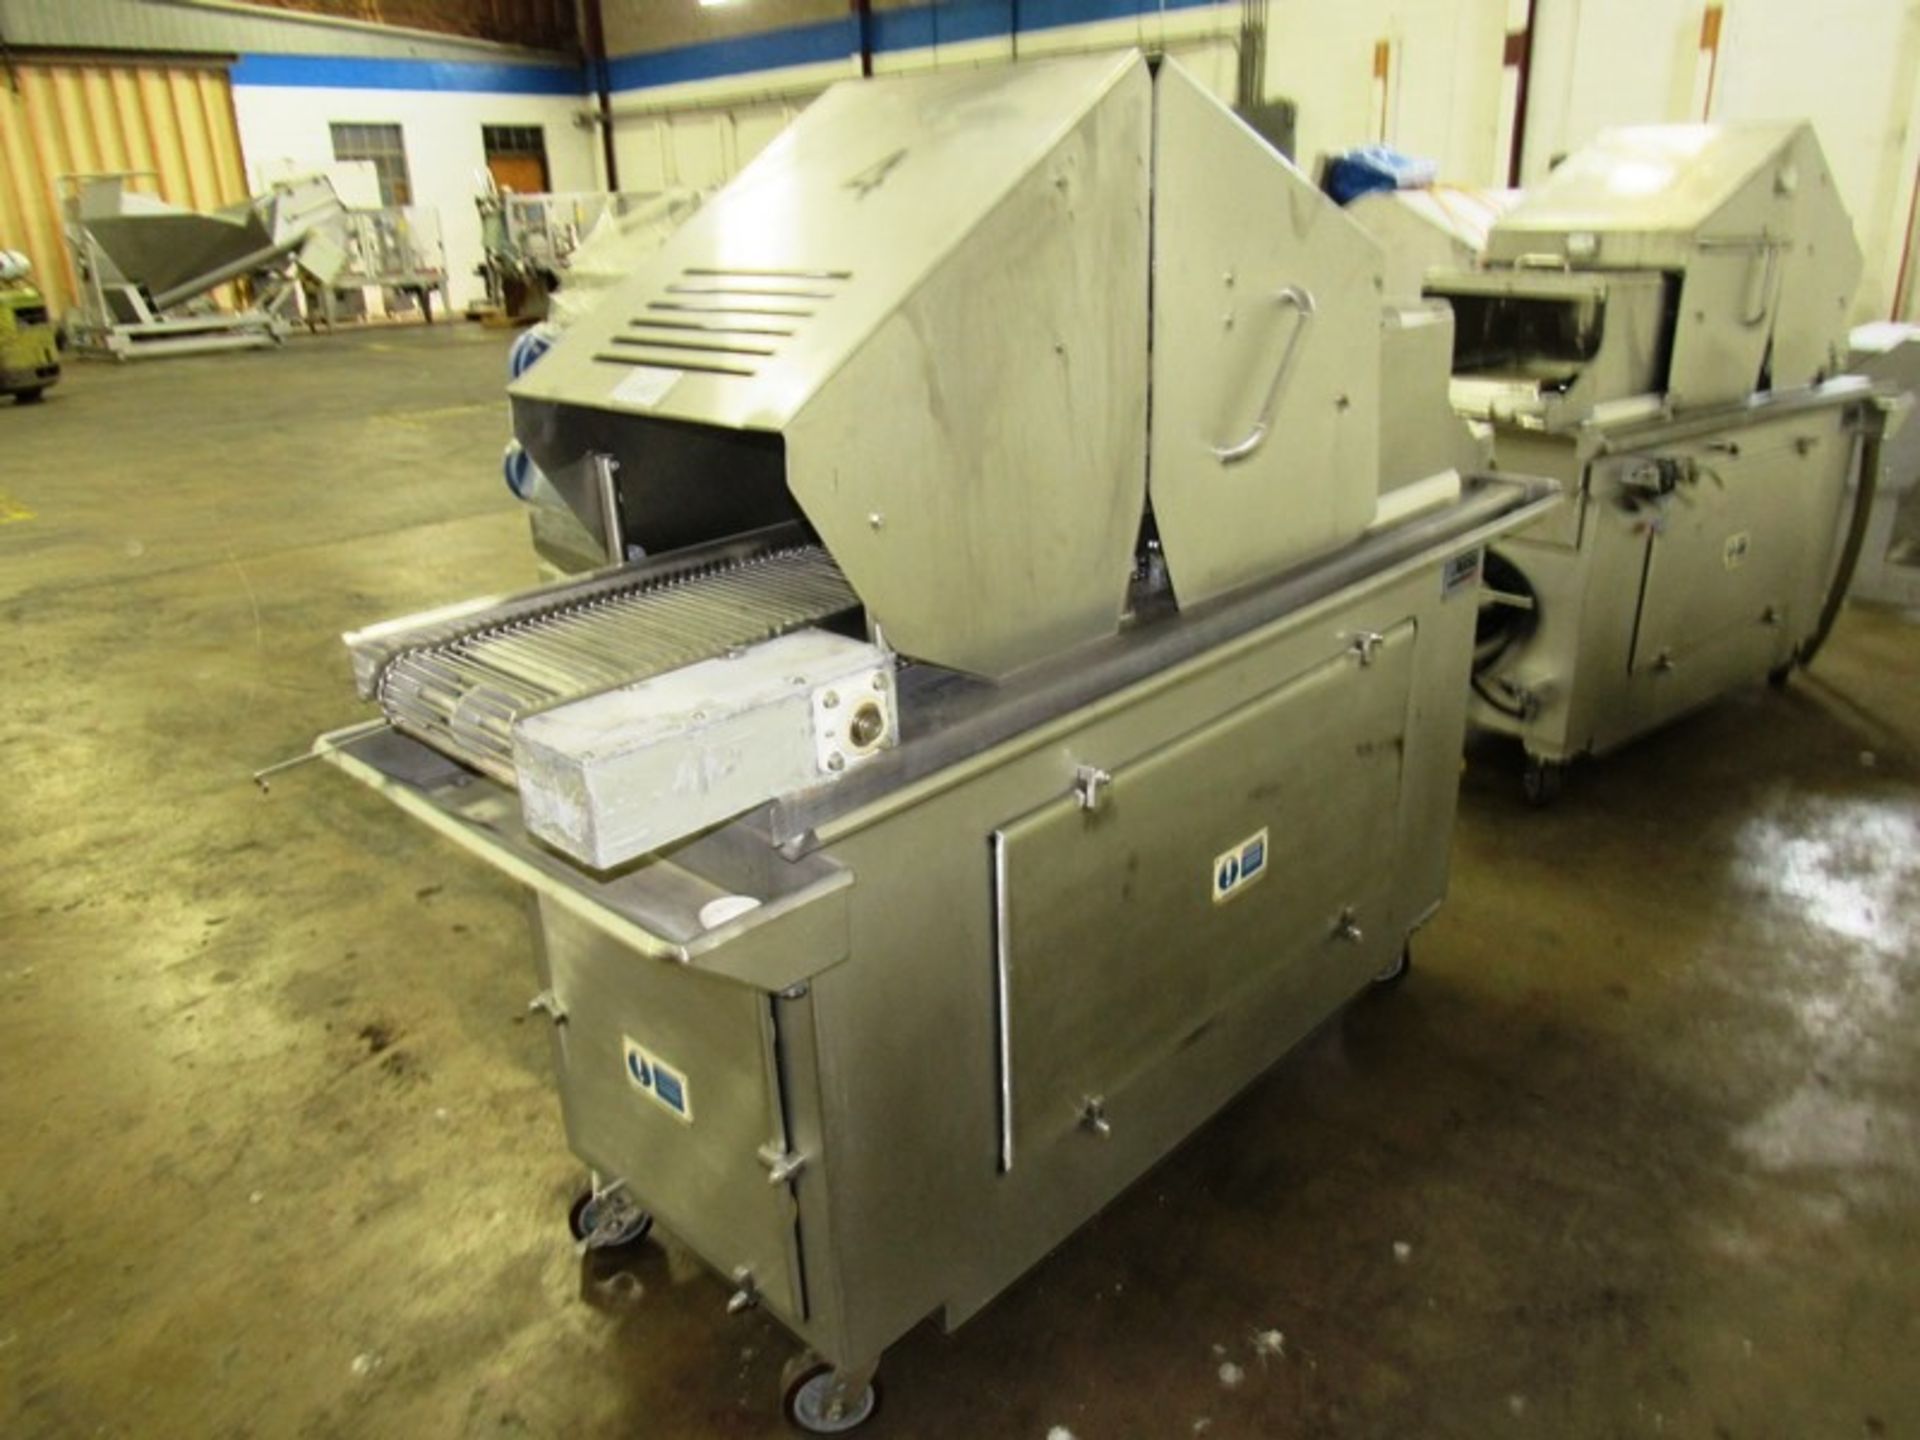 Ross Mdl. TC700M Portable Tenderizer, missing needles, 220 volts, 12" wide conveyor - Image 3 of 7